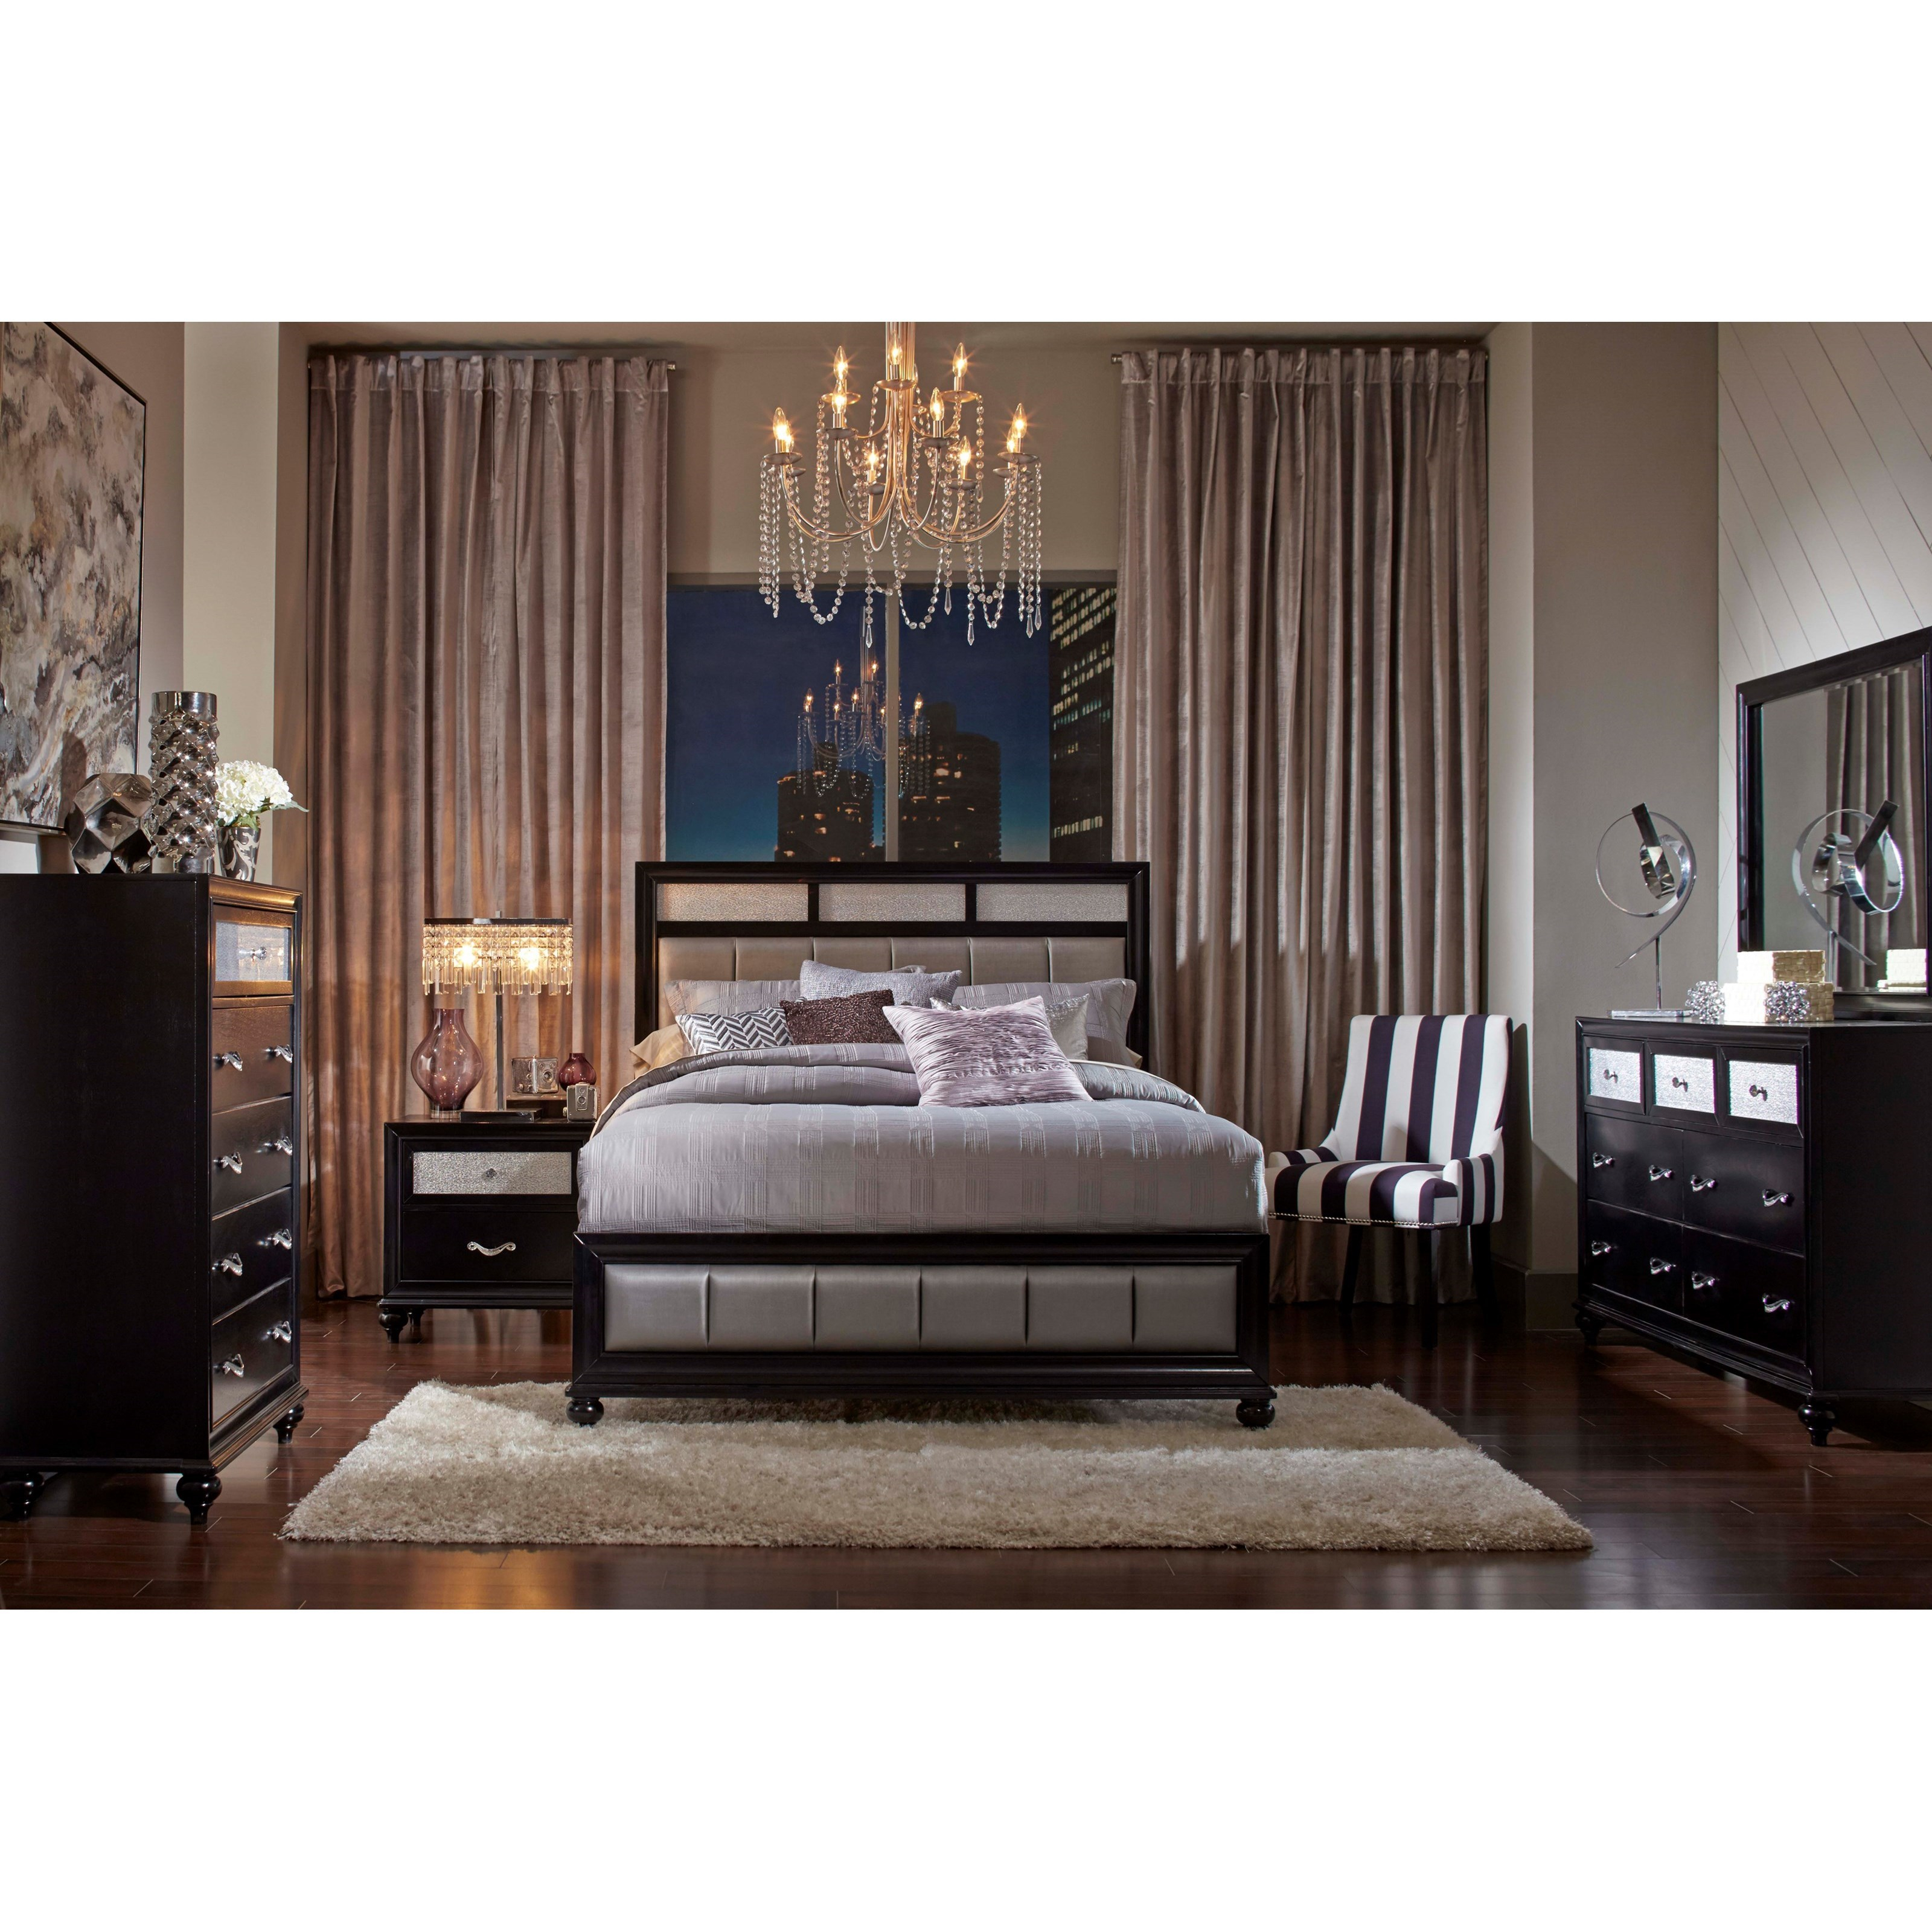 Barzini California King Bedroom Group Coaster intended for size 3200 X 3200